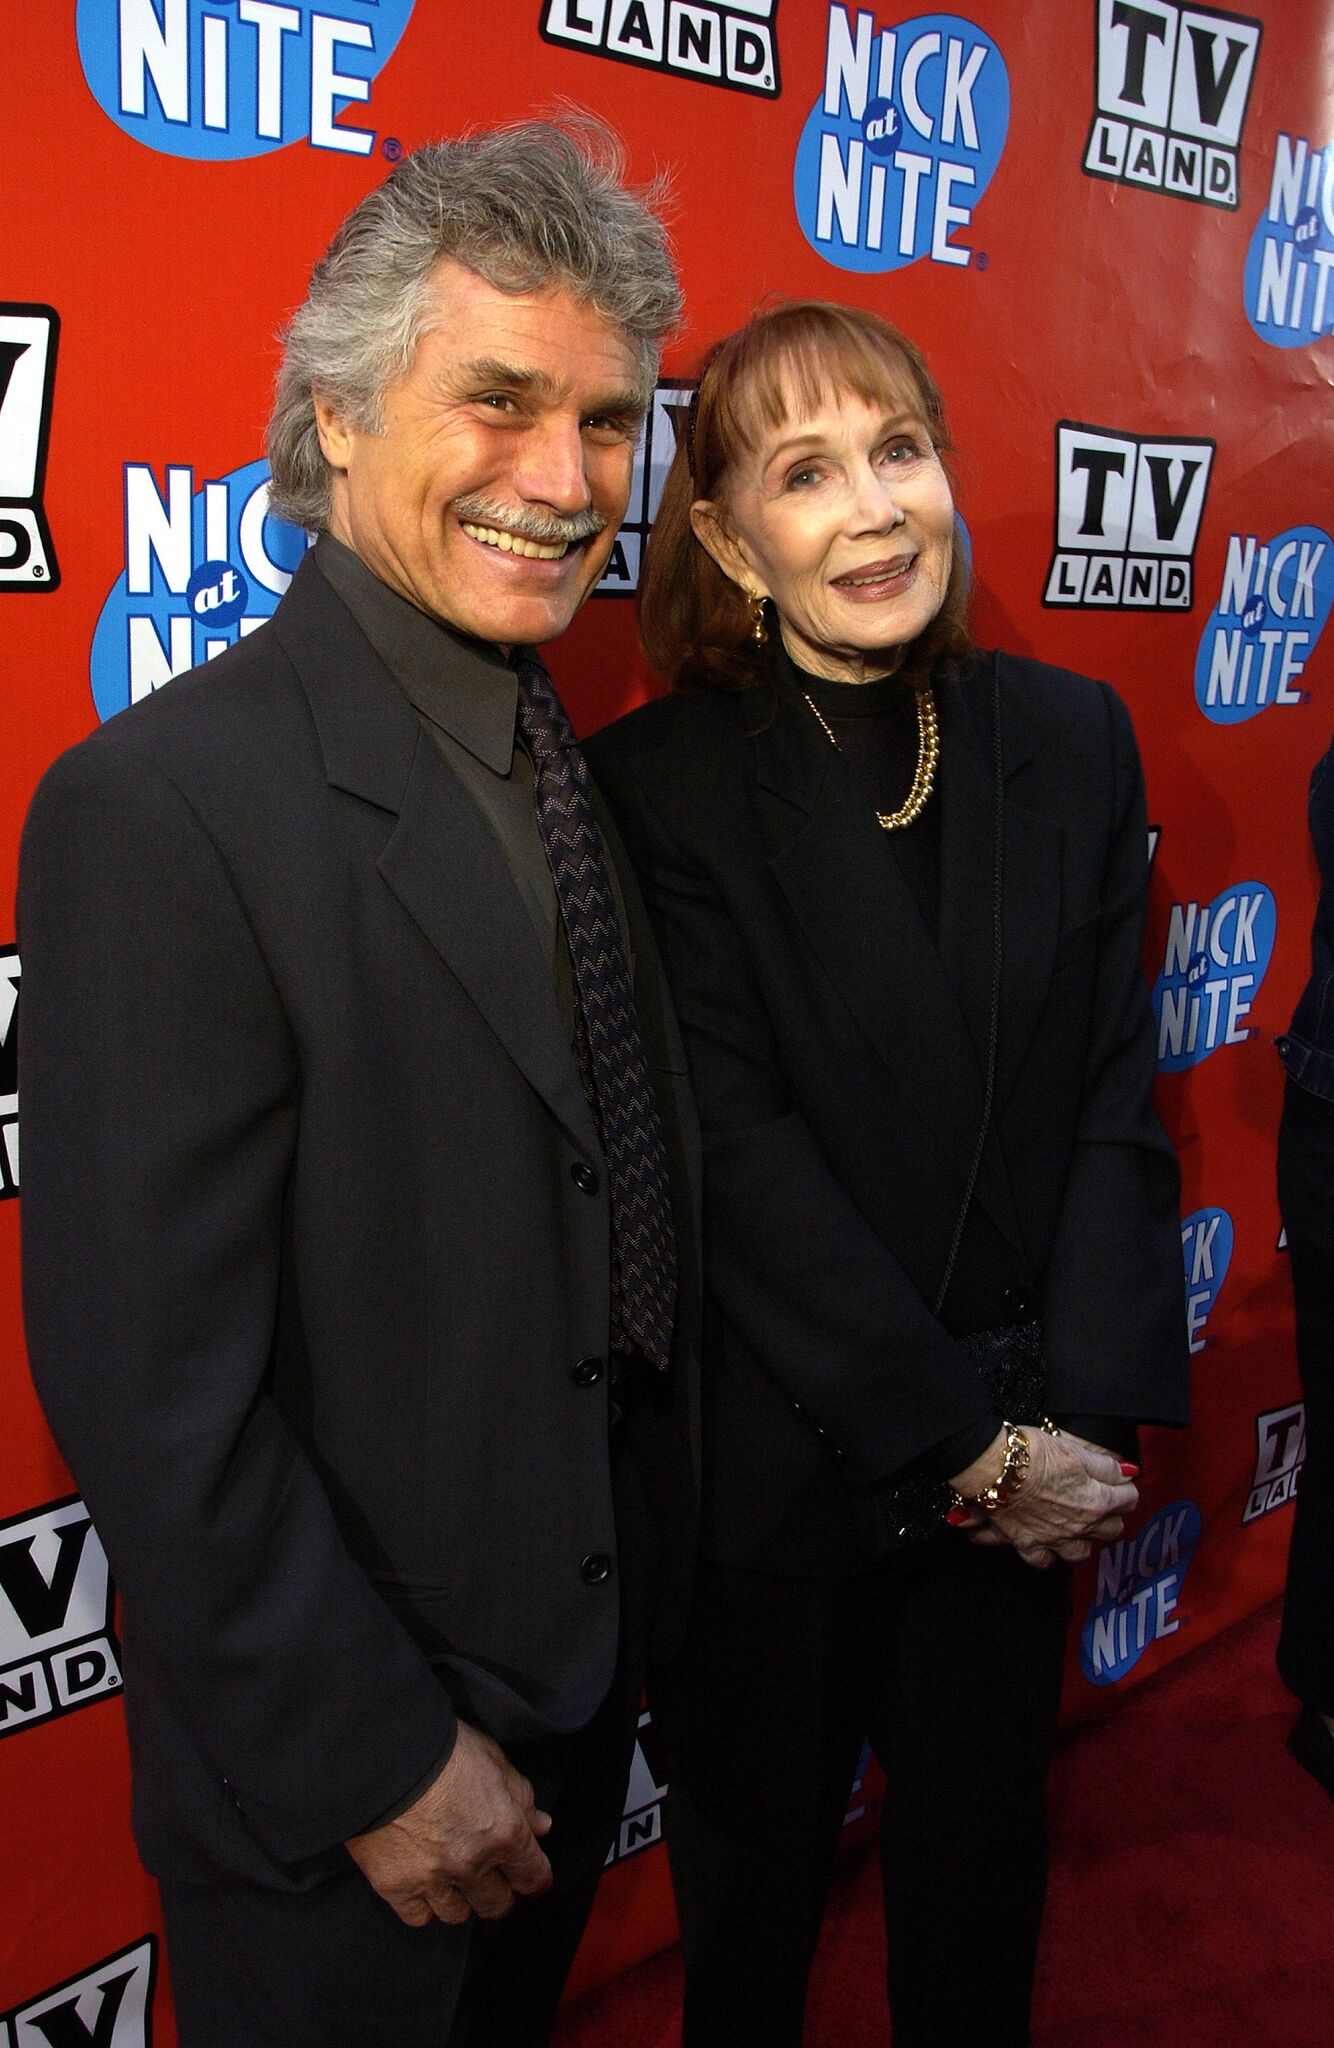 Katherine Helmond, "Soap", and husband David Christian, at the TV Land and Nick at Nite Upfront in "The Bat Cave" on Broadway | Getty Images